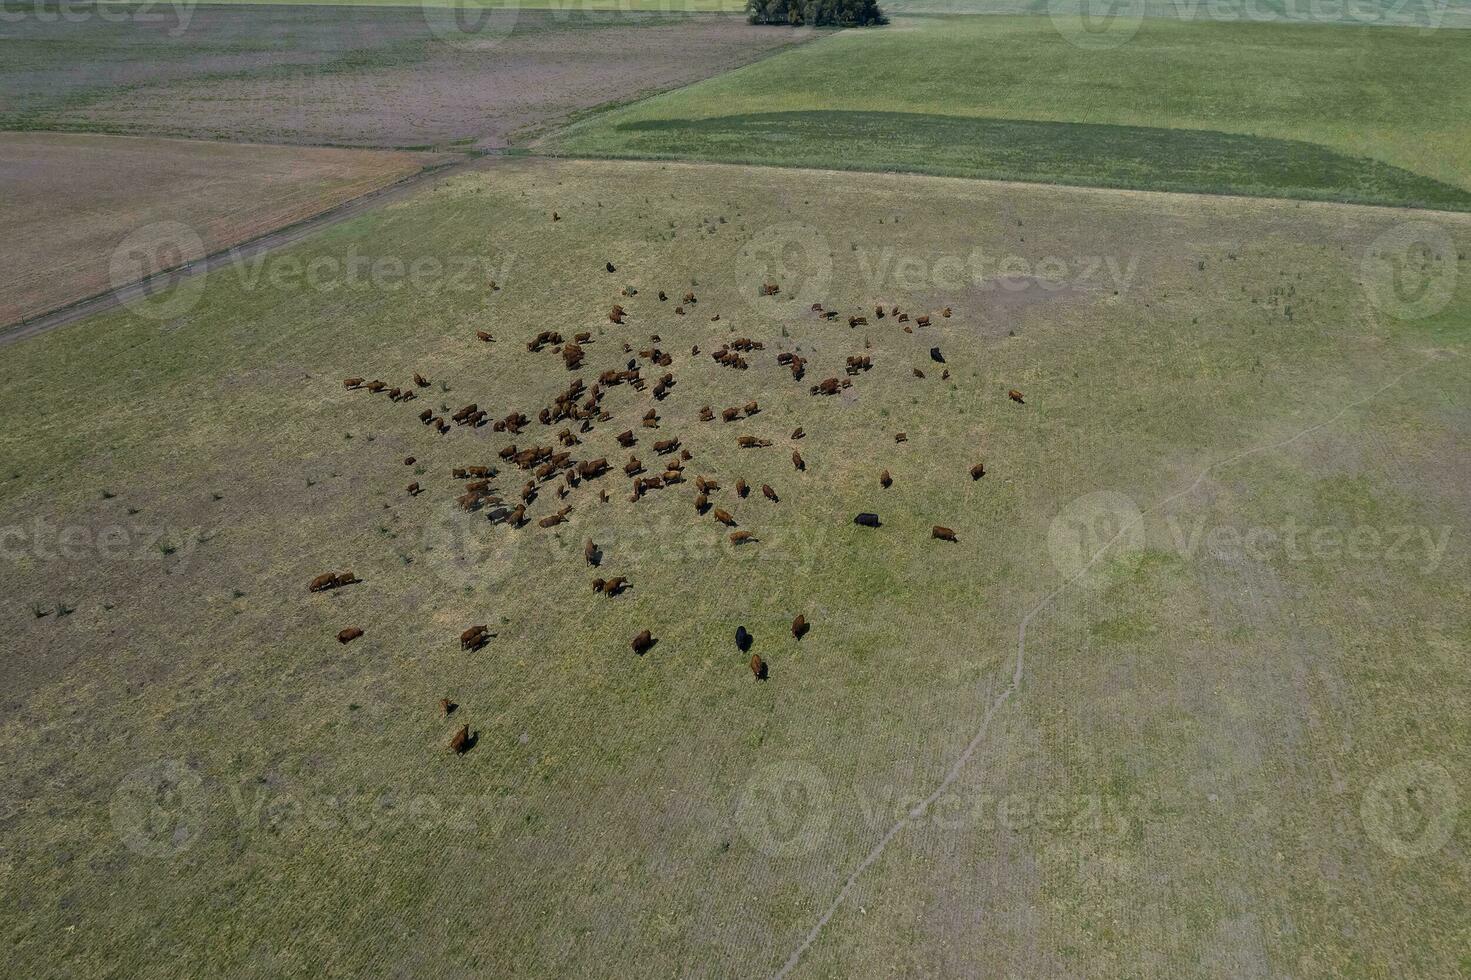 Cattle raising in pampas countryside, La Pampa province, Argentina. photo